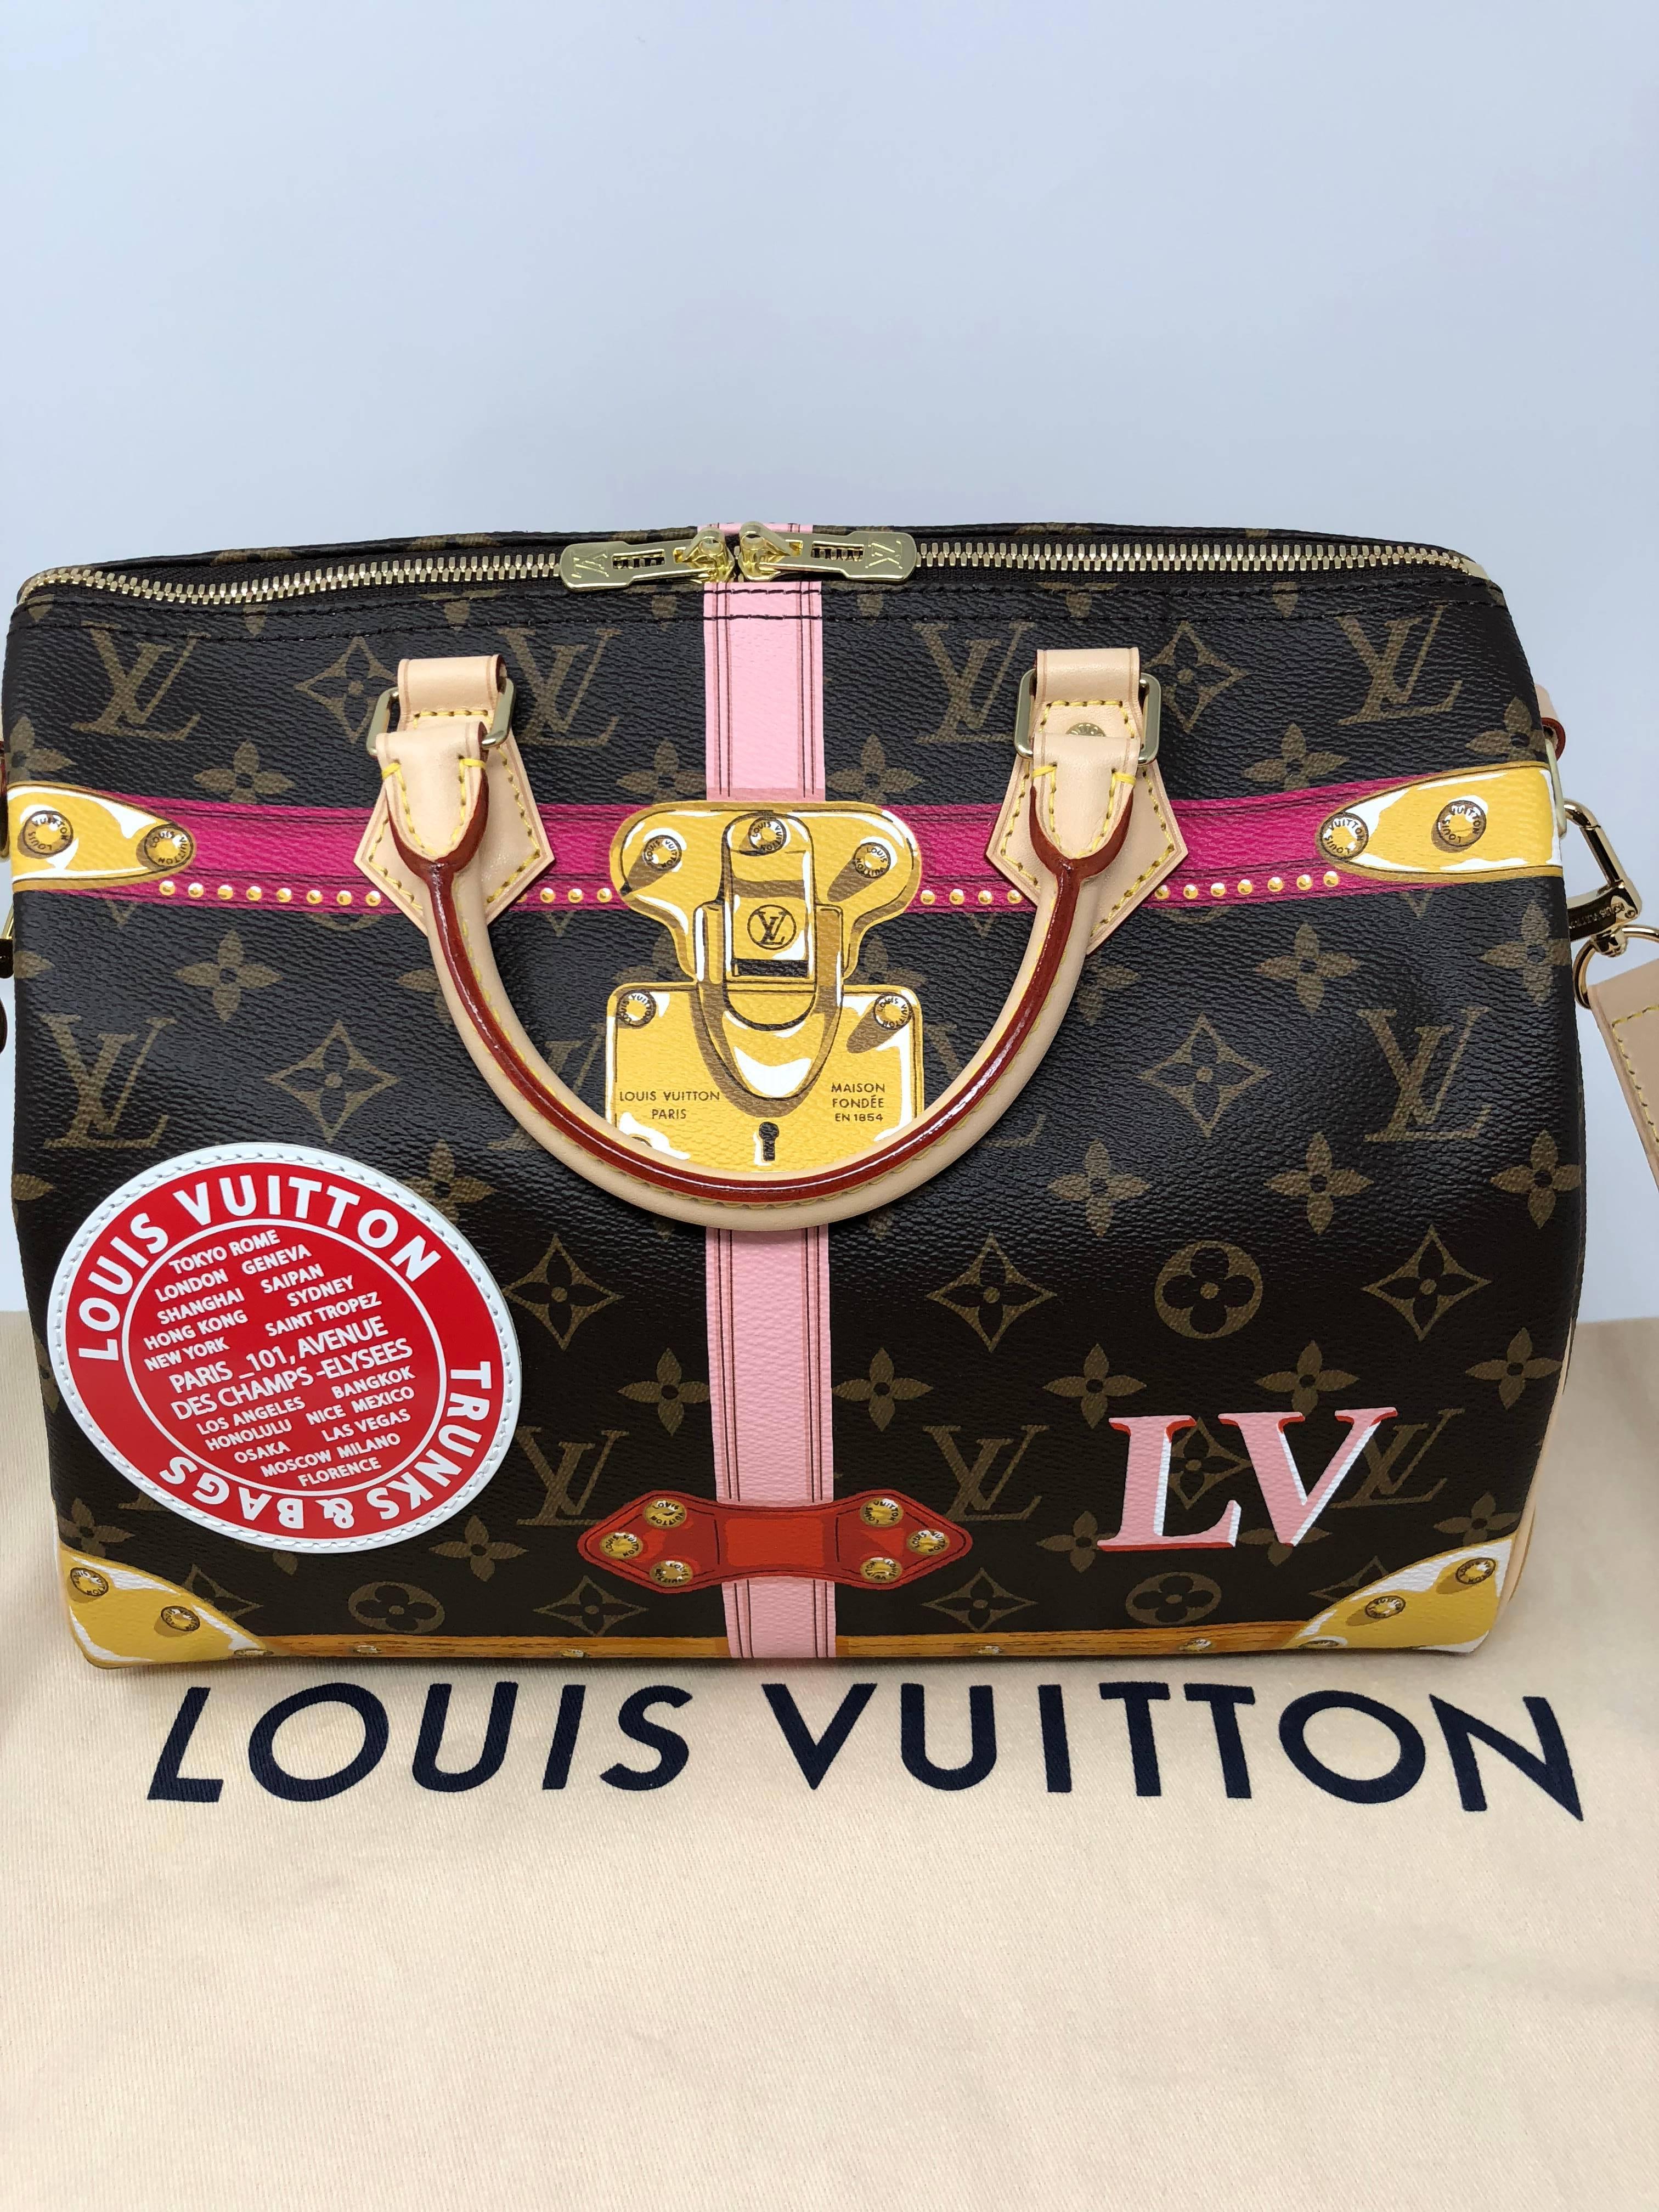 Authentic Louis Vuitton Speedy 30 bandouliere in limited edition Trunks 2018 collection. Sold out and brand new. This speedy comes with removable strap for multiple wear. The interior canvas has the unique old trunks design. The exterior is painted